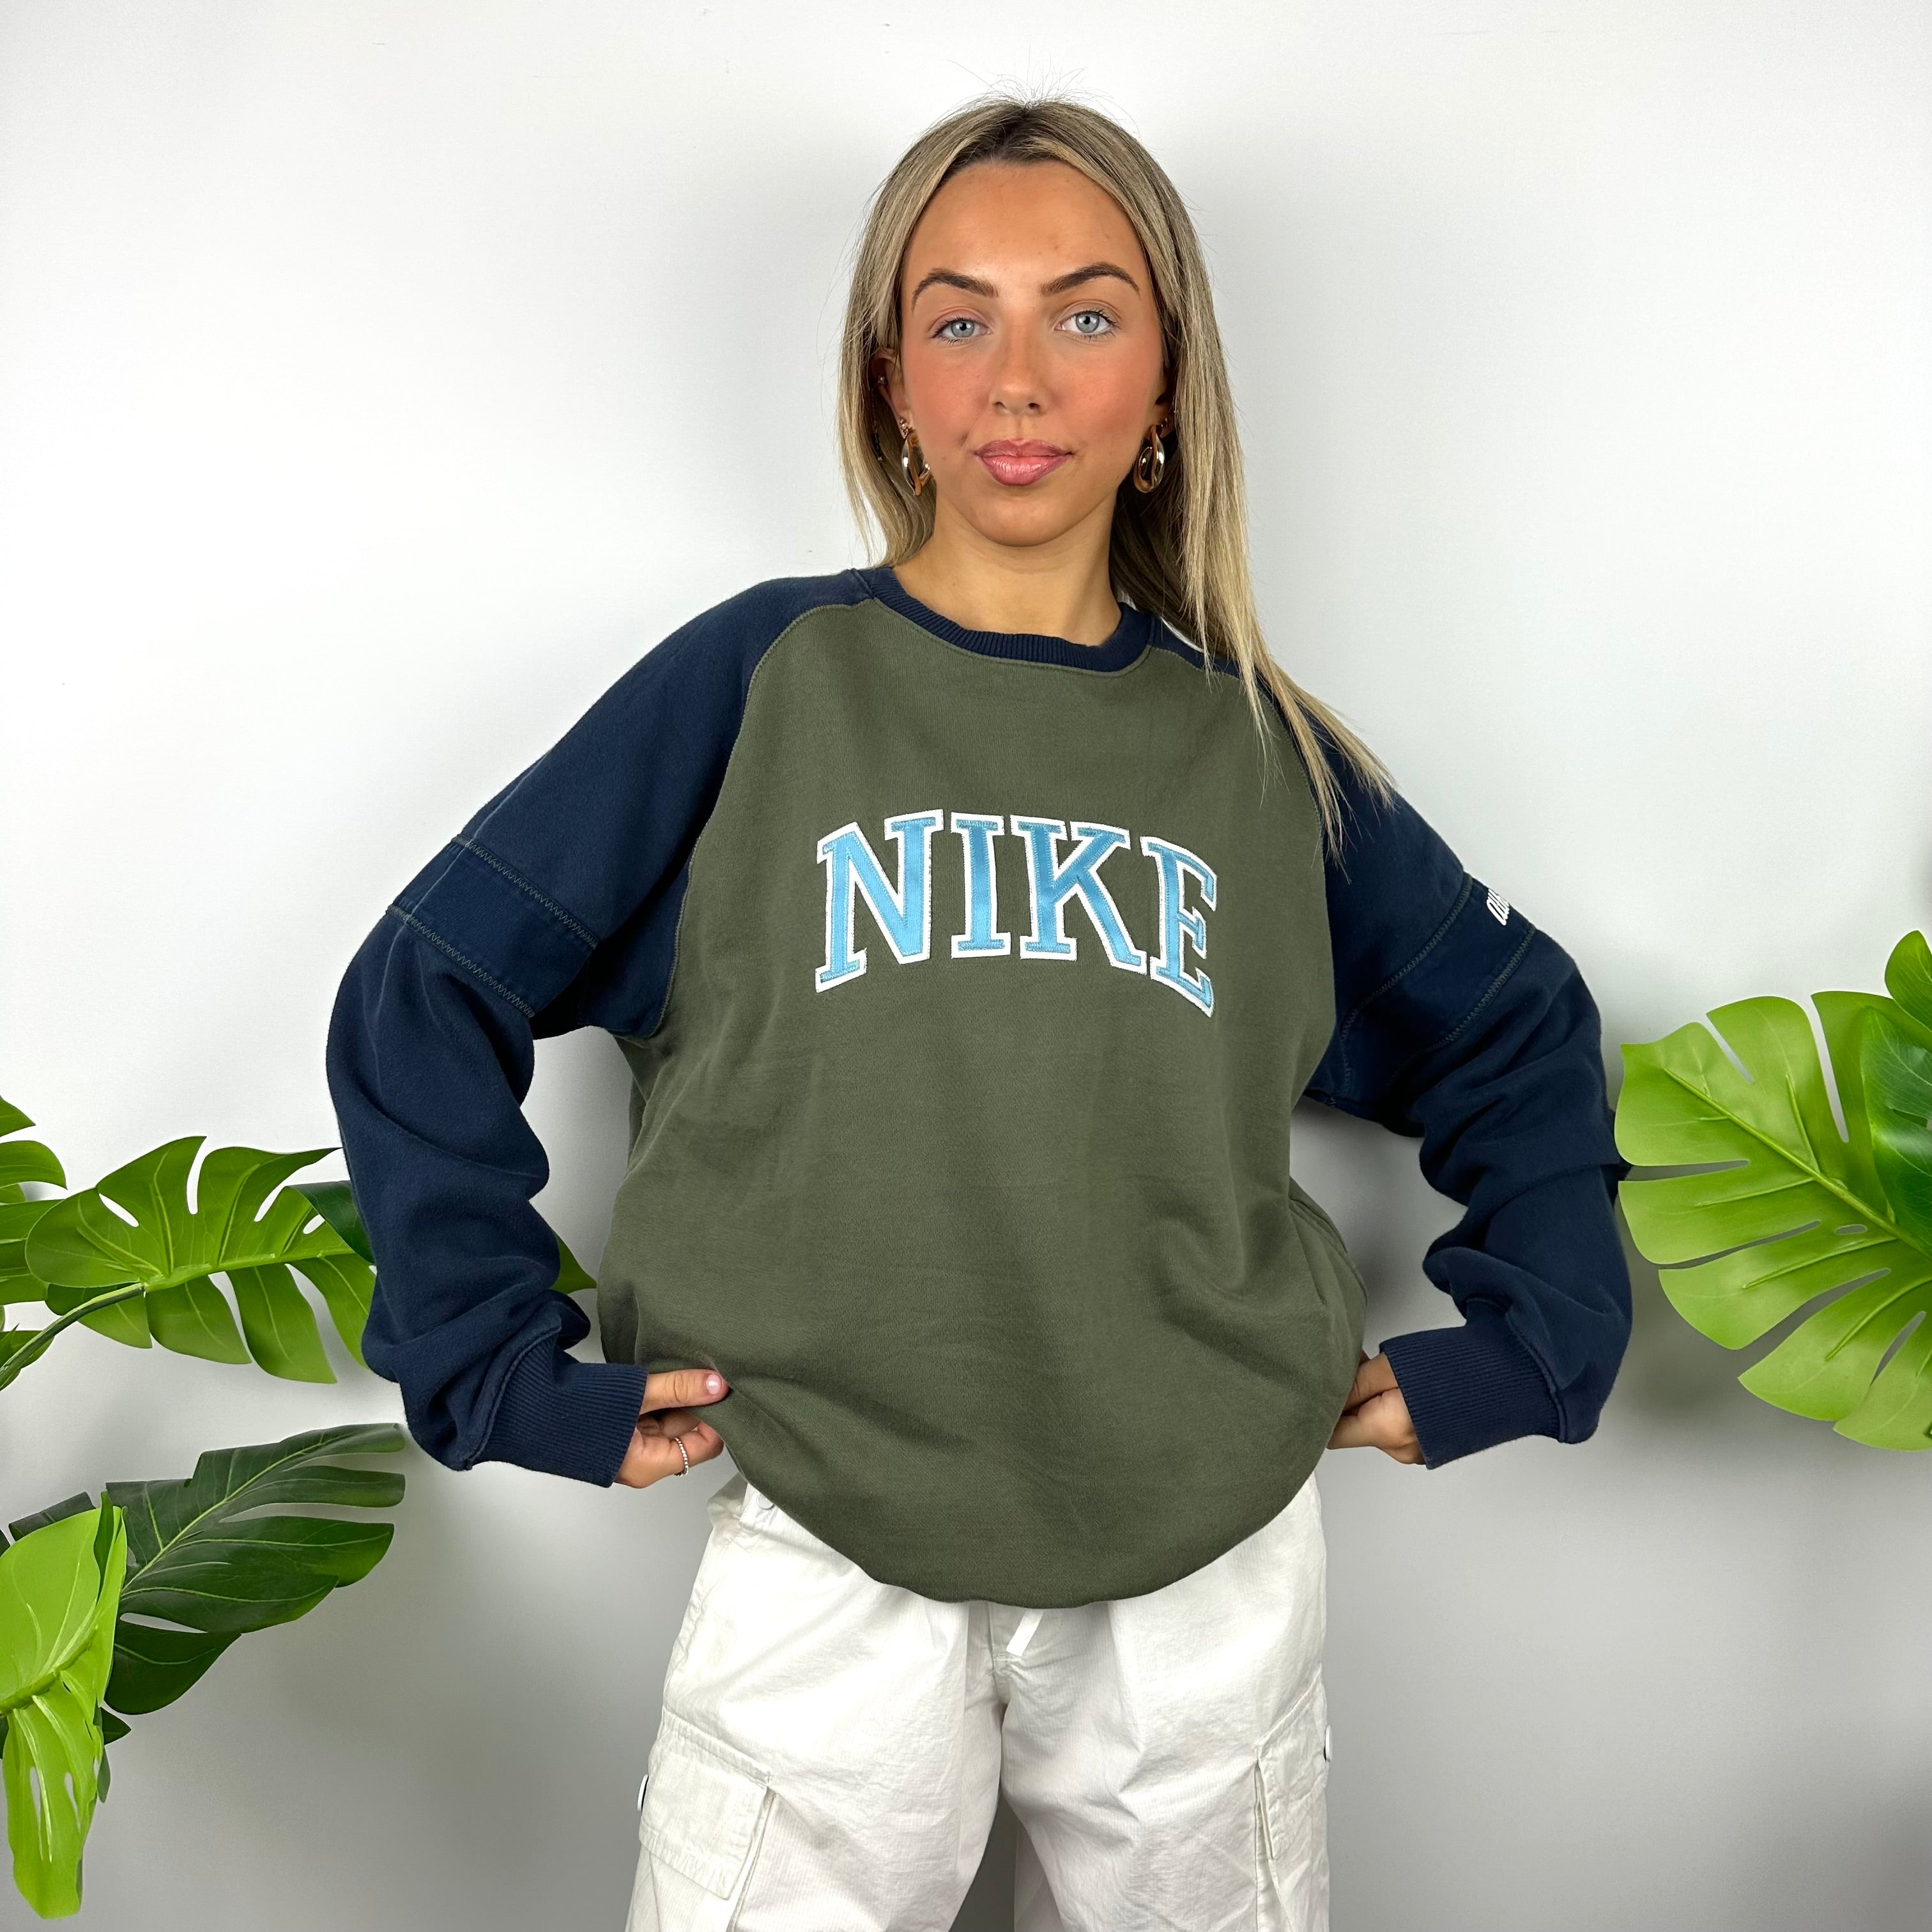 Nike RARE Green Embroidered Spell Out Sweatshirt (M)